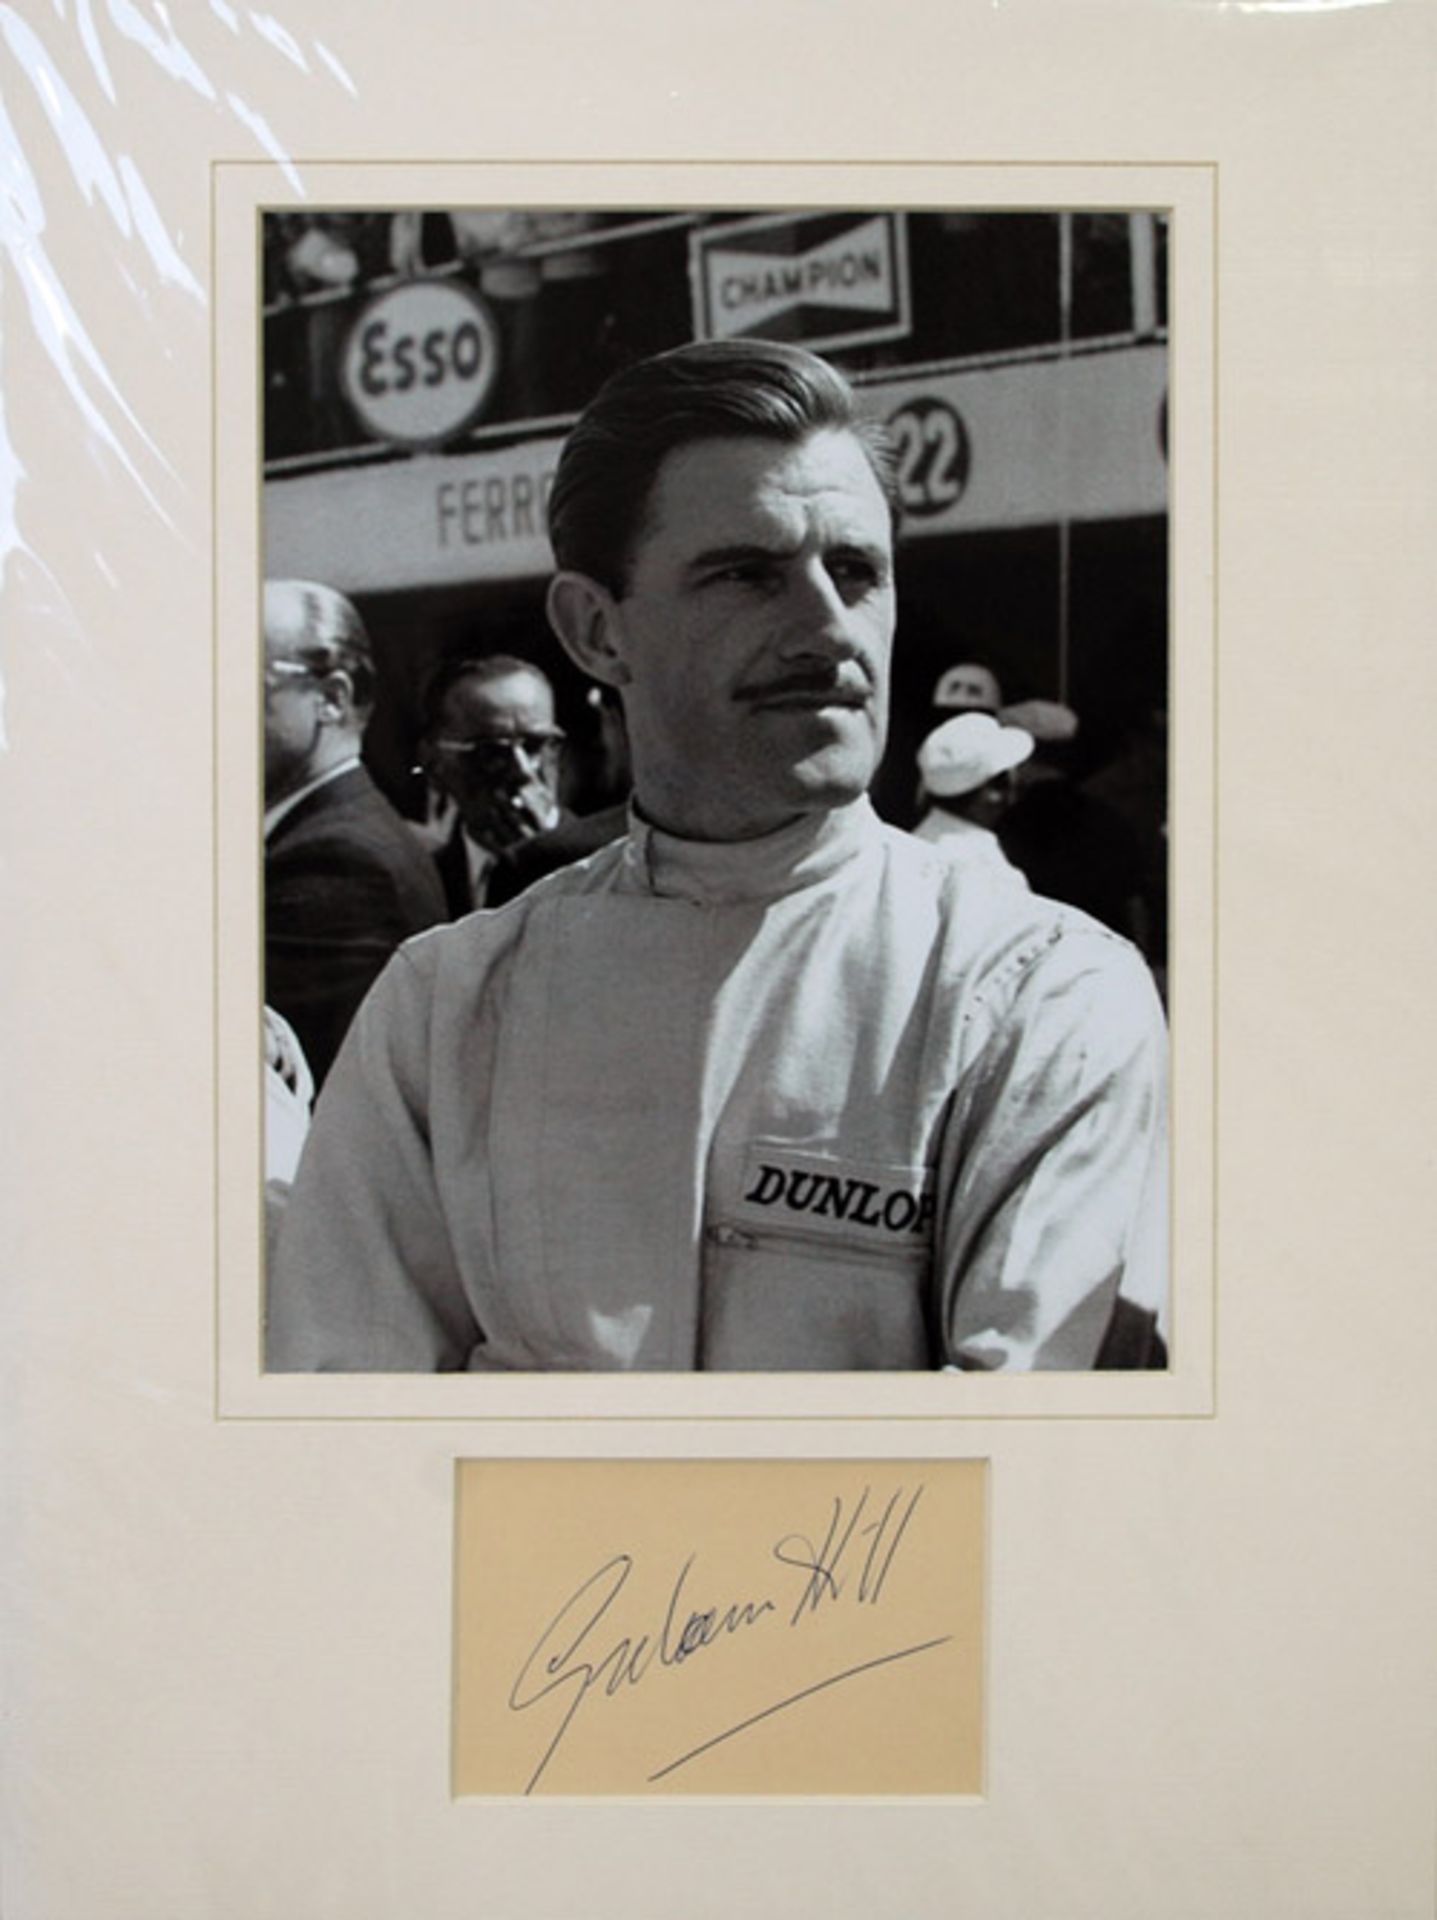 Autograph Matted with 10x8 portrait to dimensions 16x12 inchesGraham Hill was the only F1 racer to